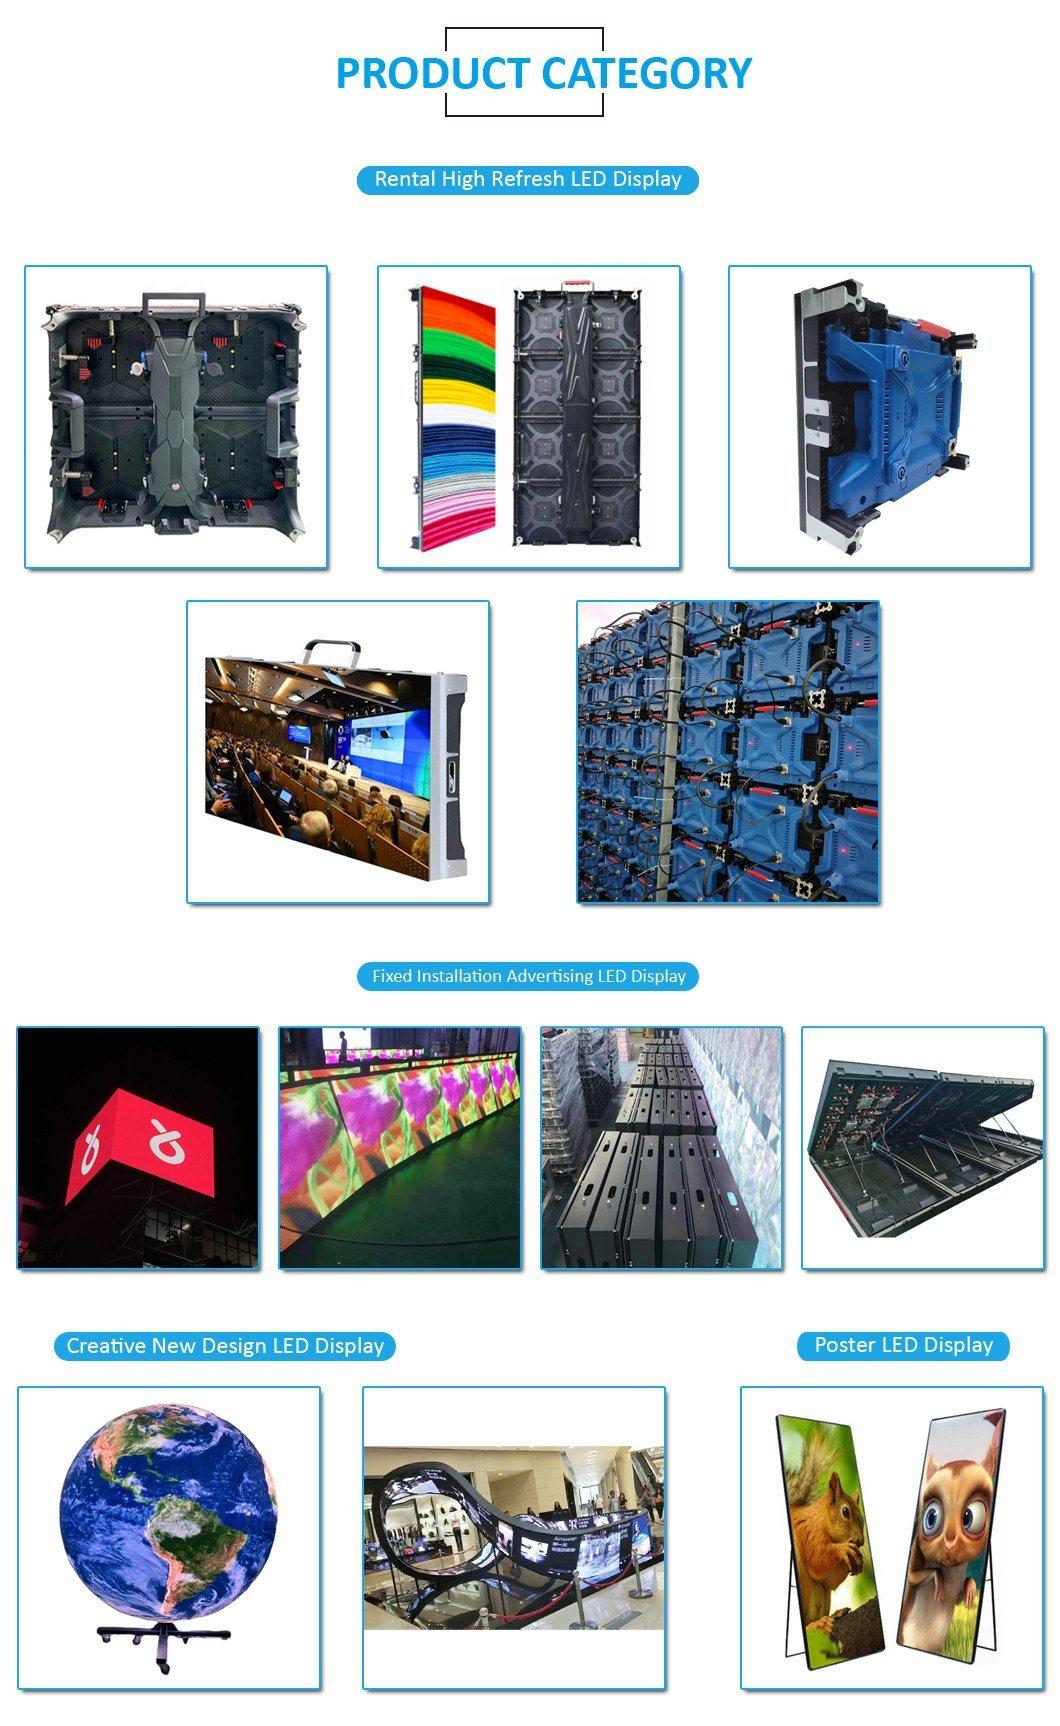 Outdoor Full Color Curve P3.91 P4.81 Rental LED Display for Advertising Panel Screen (500*500mm)